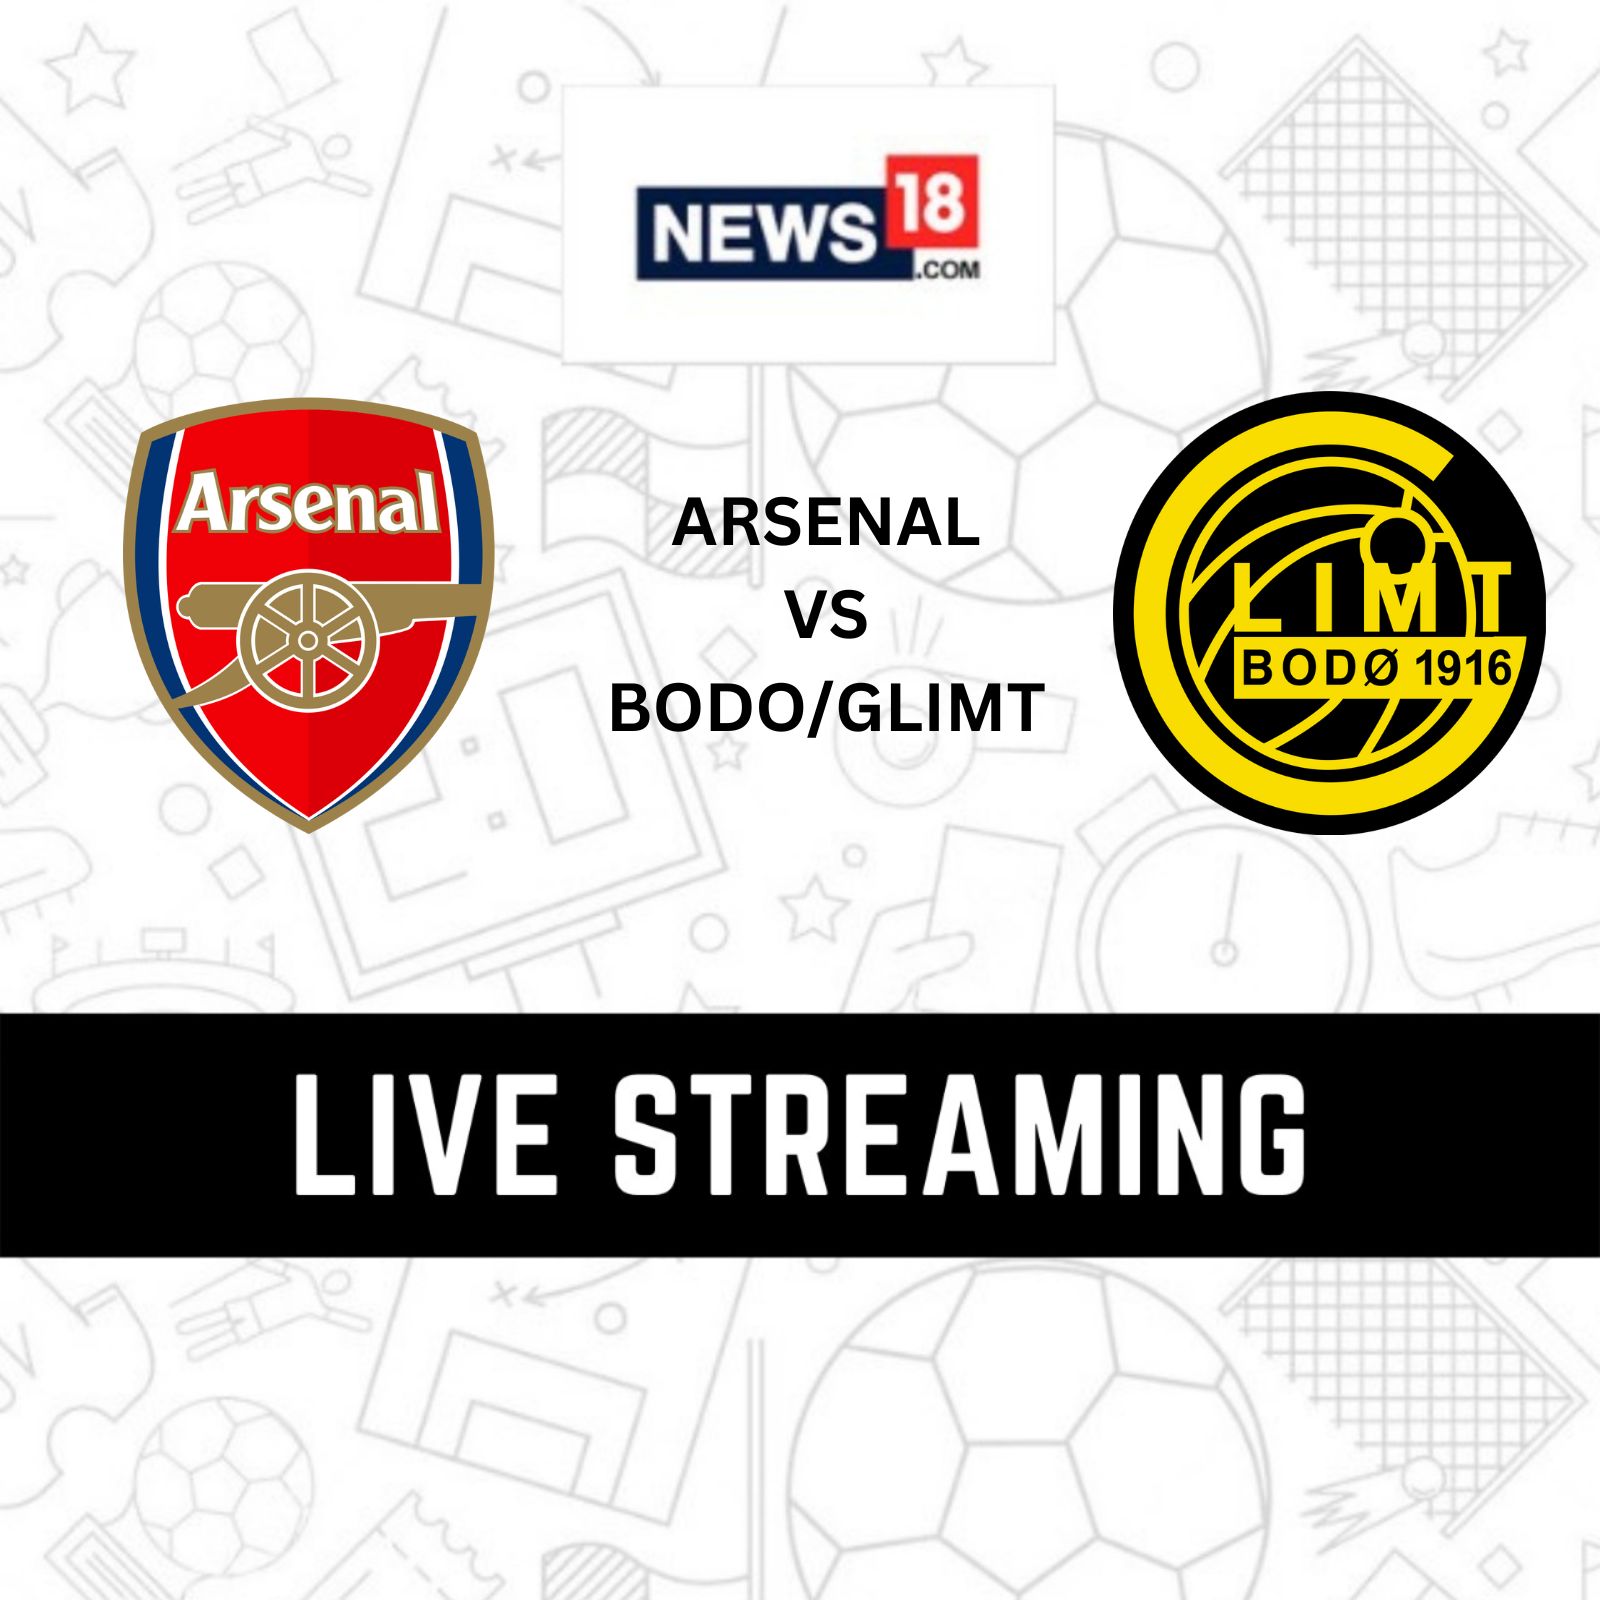 Arsenal vs Bodo/Glimt Live Streaming When and Where to Watch Europa League Live Coverage on Live TV Online